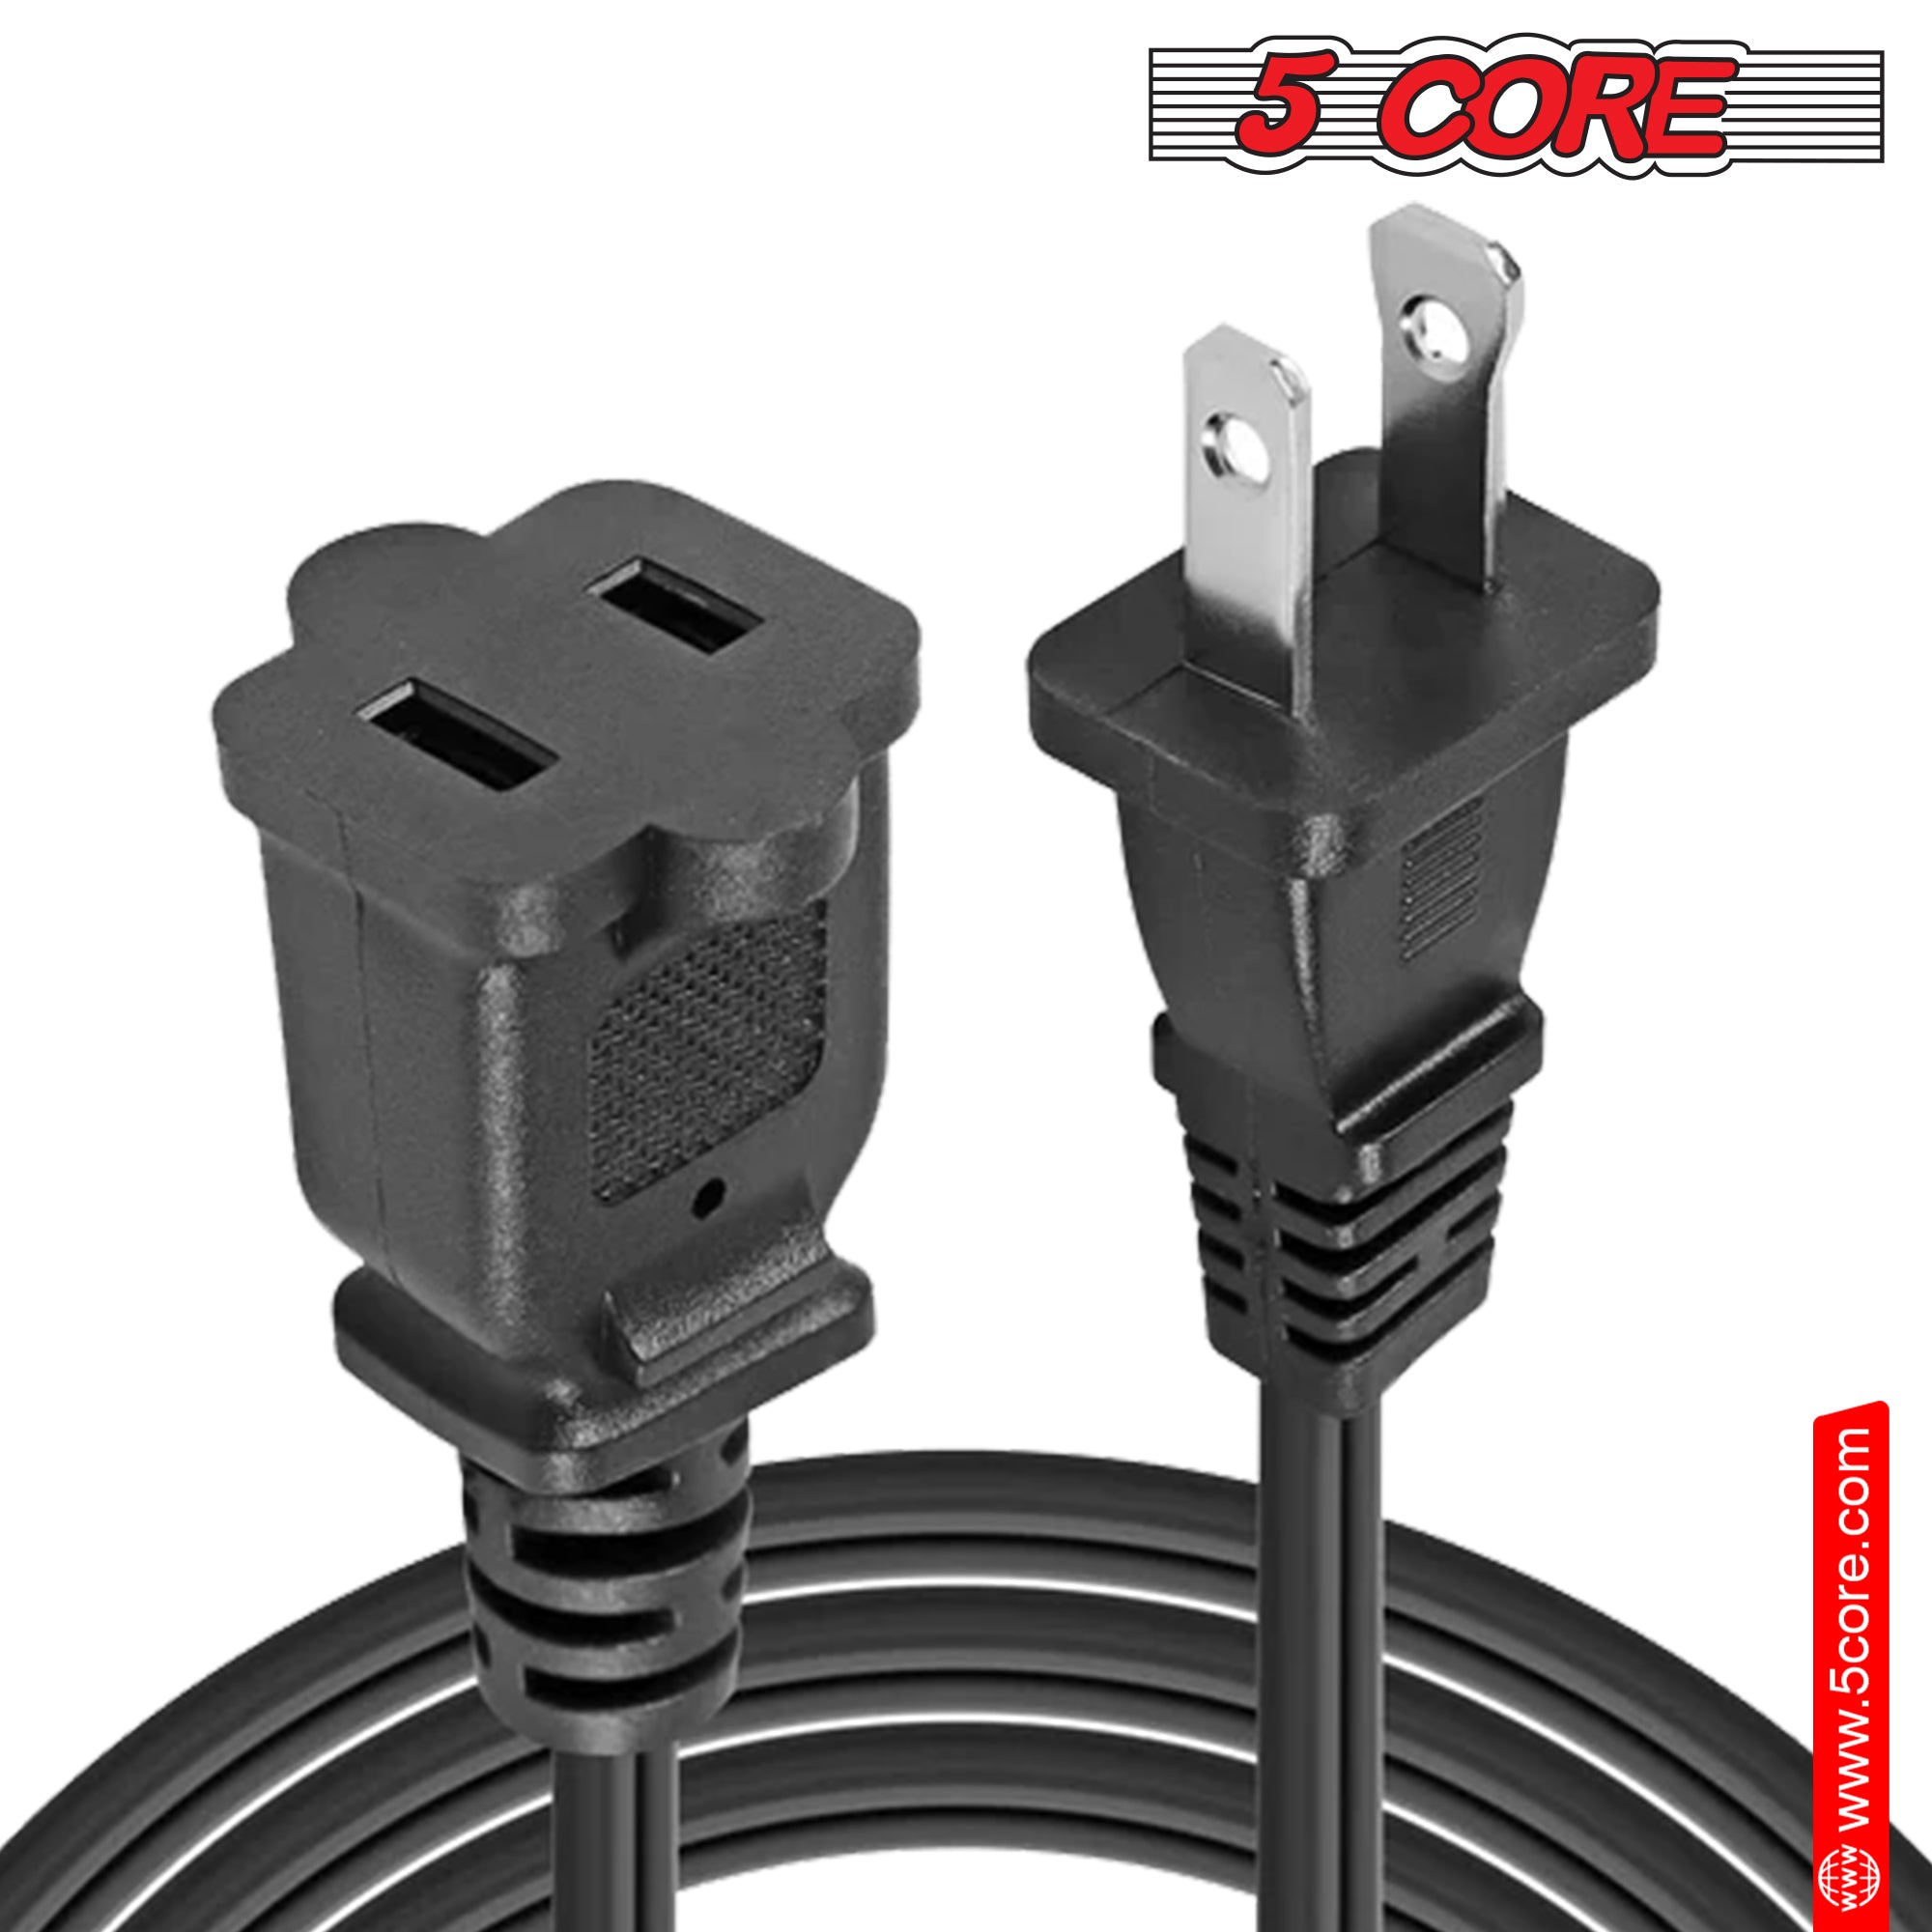 5 Core 12 Ft Black AC Power Cord: Reliable Extension Solution